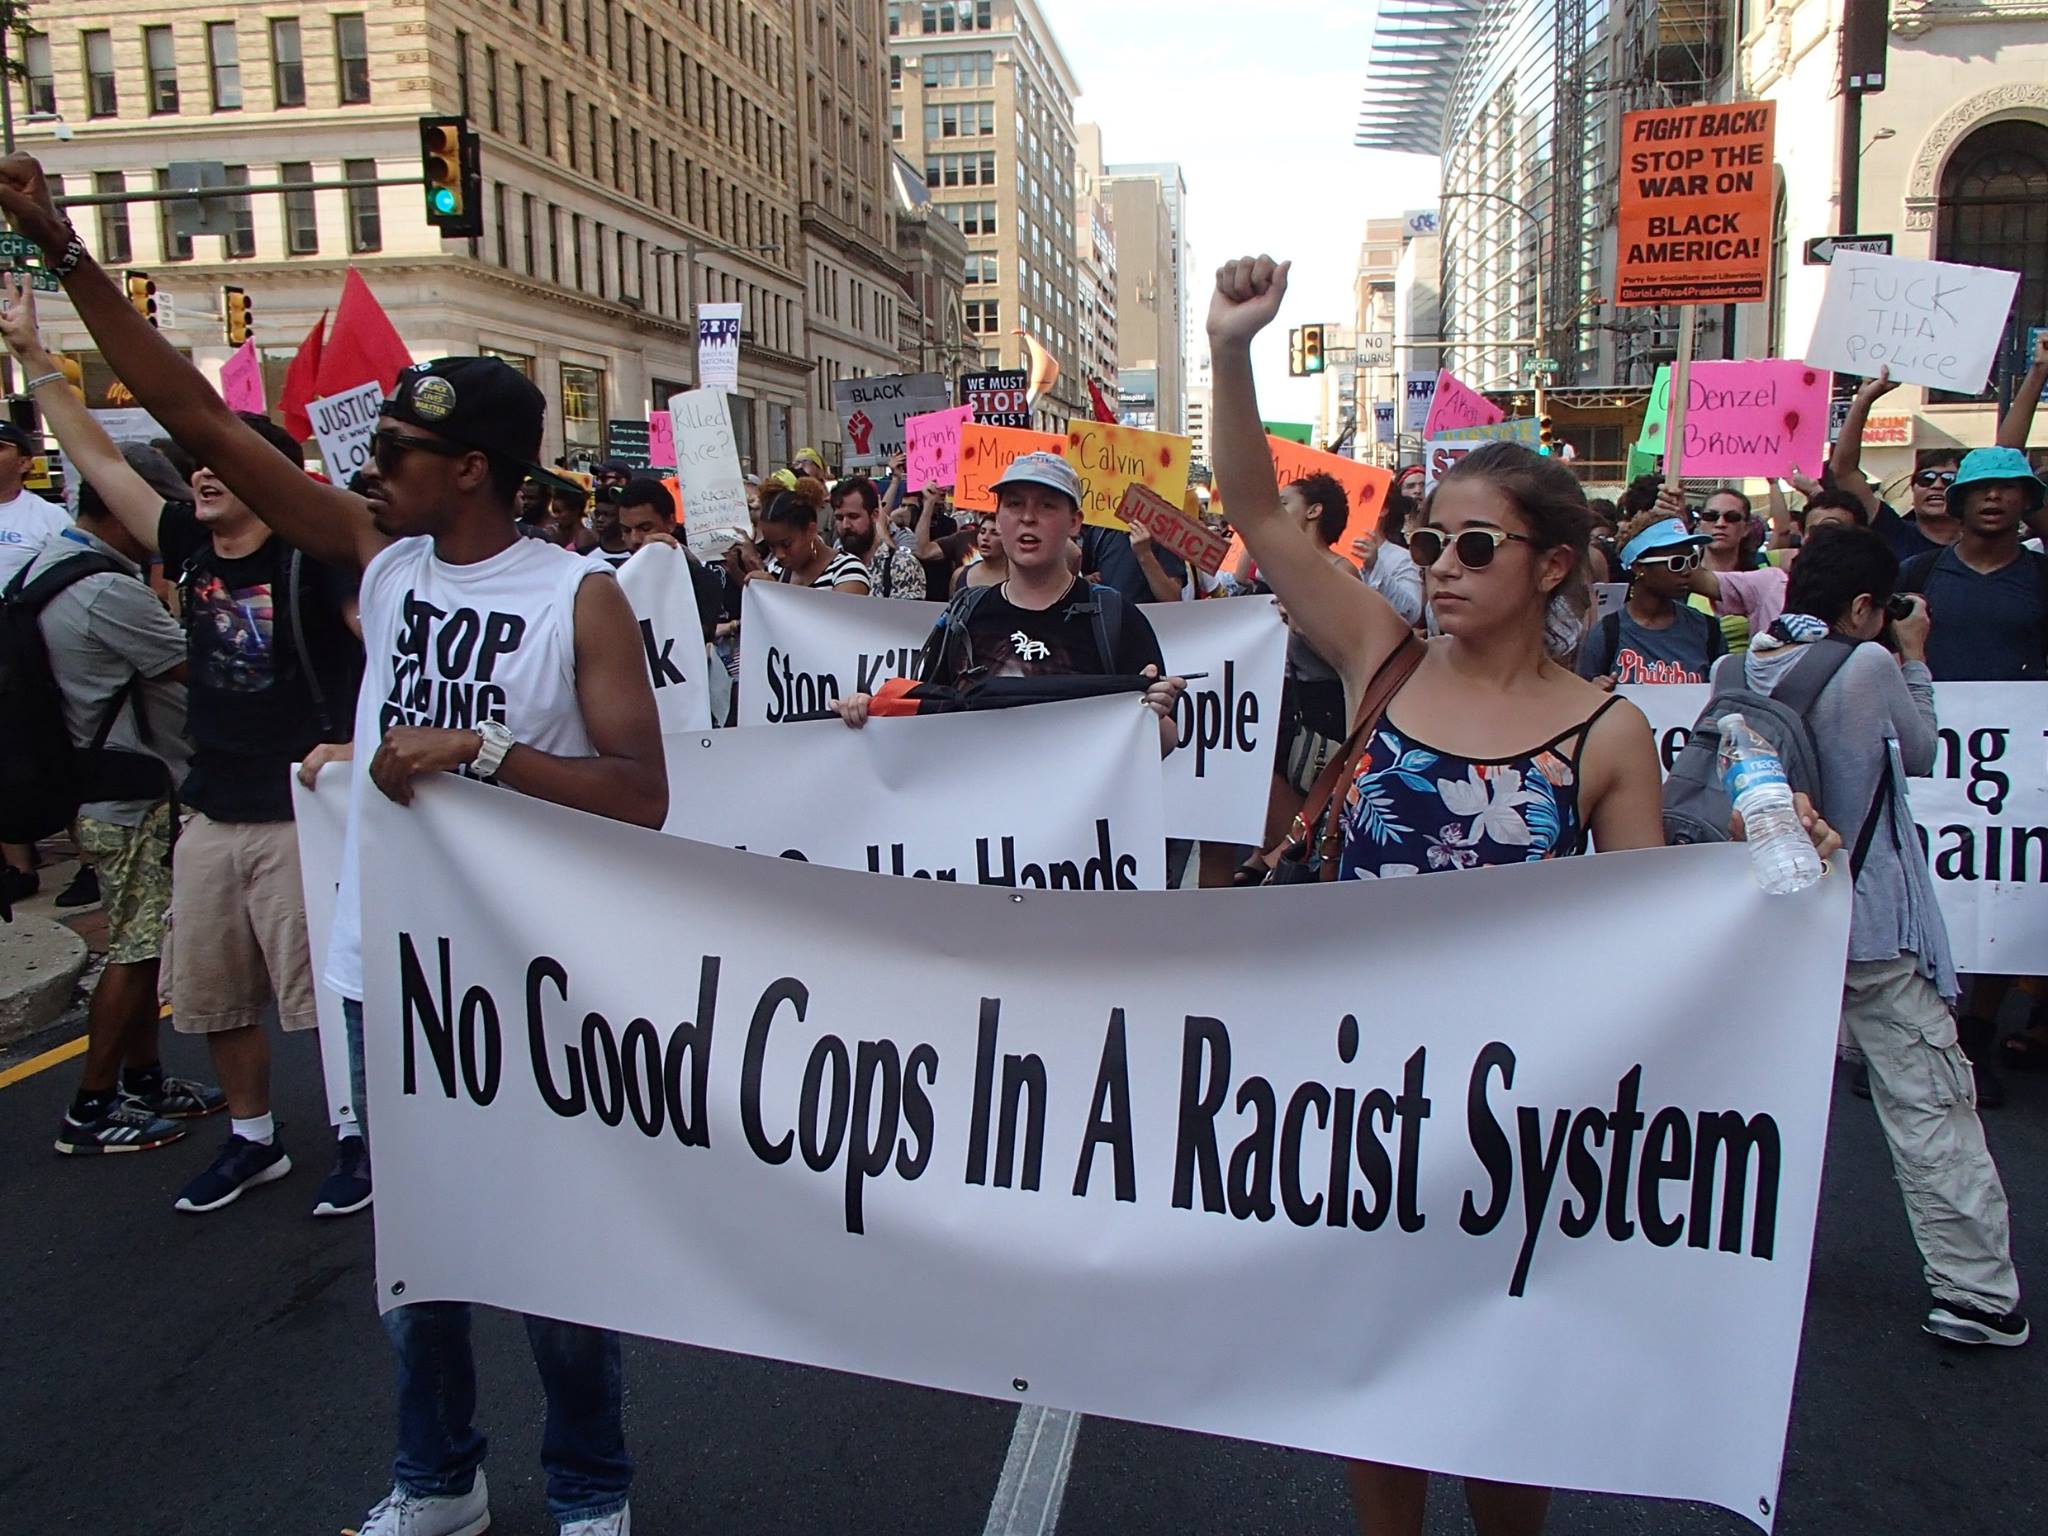 A large contingent on Tuesday focused their protest efforts against the police.